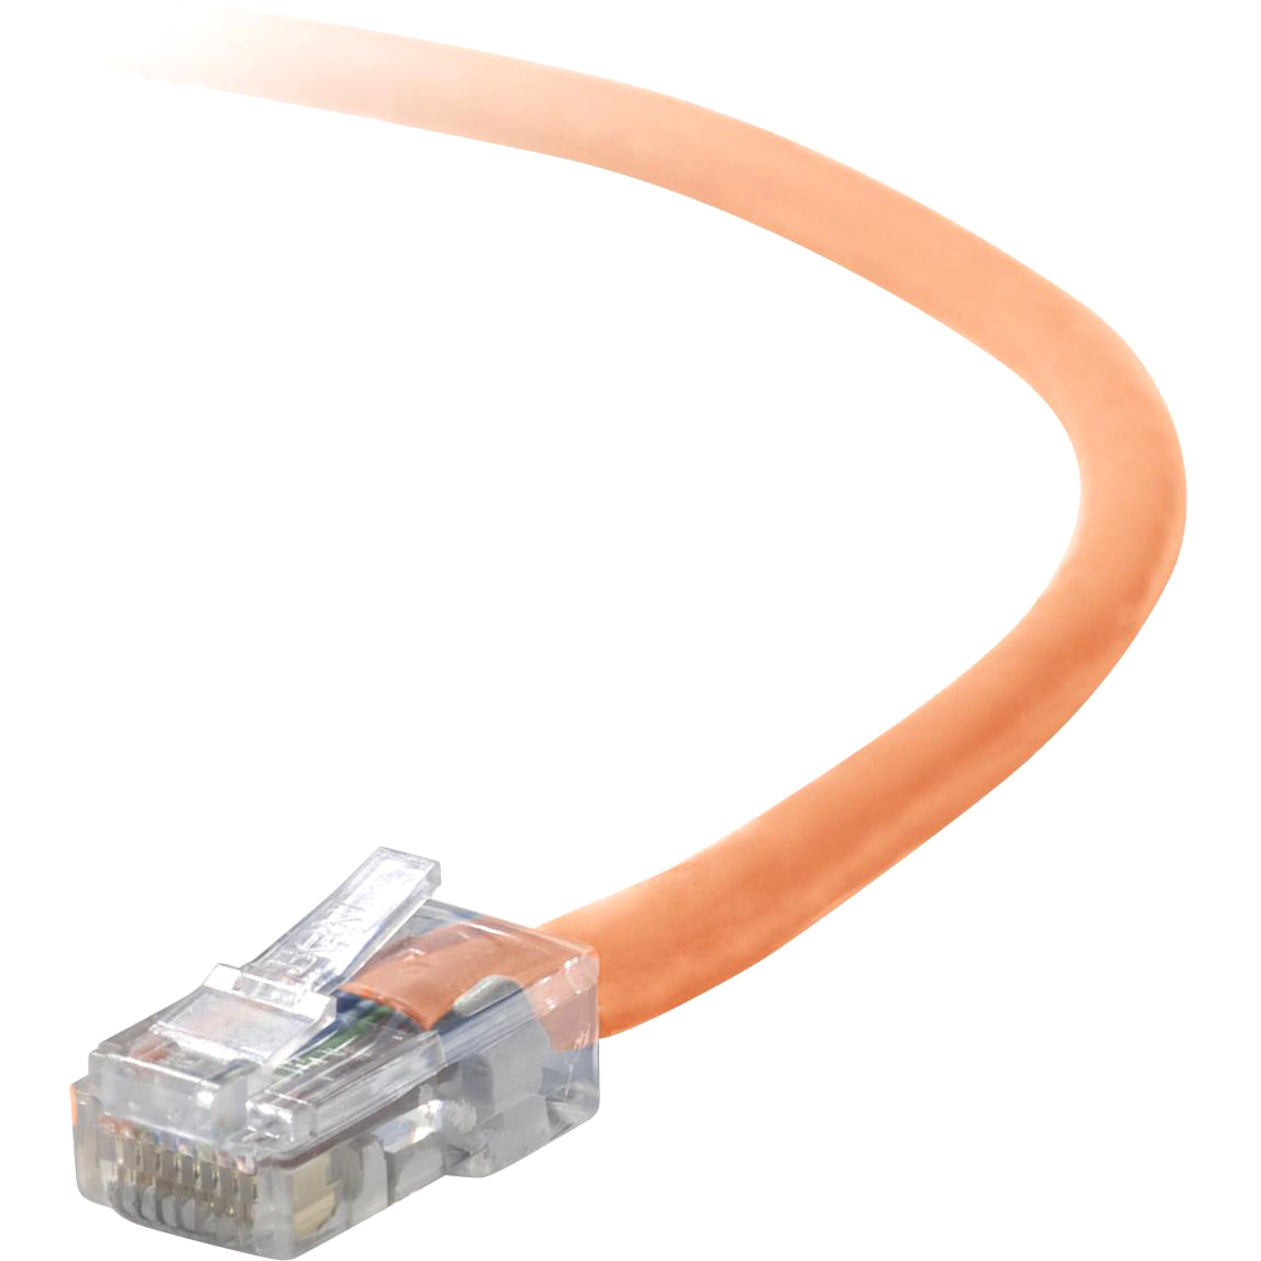 Belkin A3X126-07-ORG Cat5e Crossover Cable, 7 ft, RJ-45 Network - Male, Orange